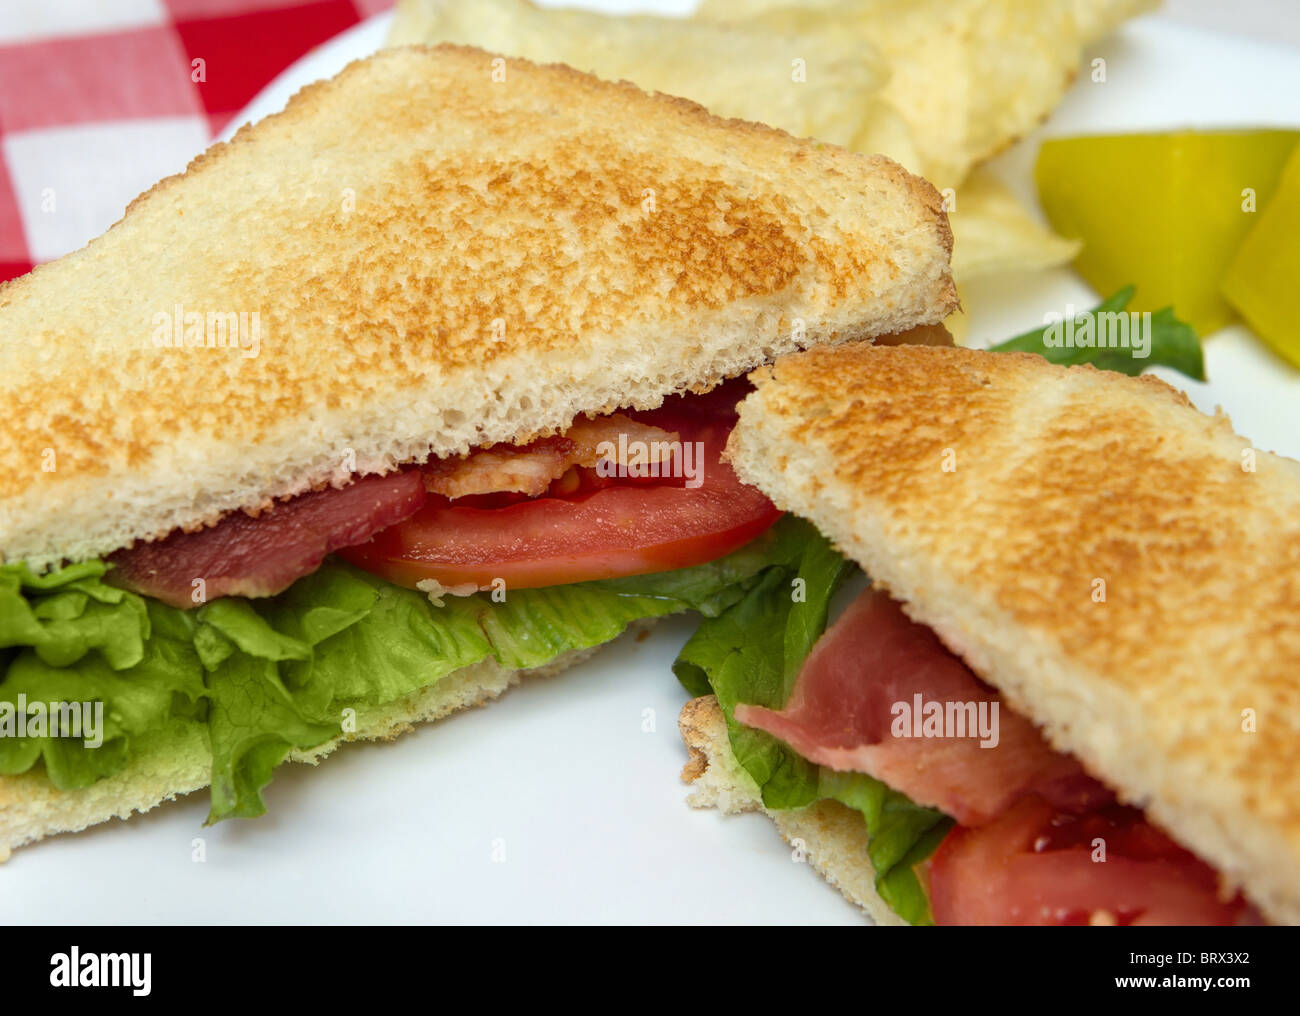 closeup photo of the inside of a blt sandwich on a white plate Stock Photo